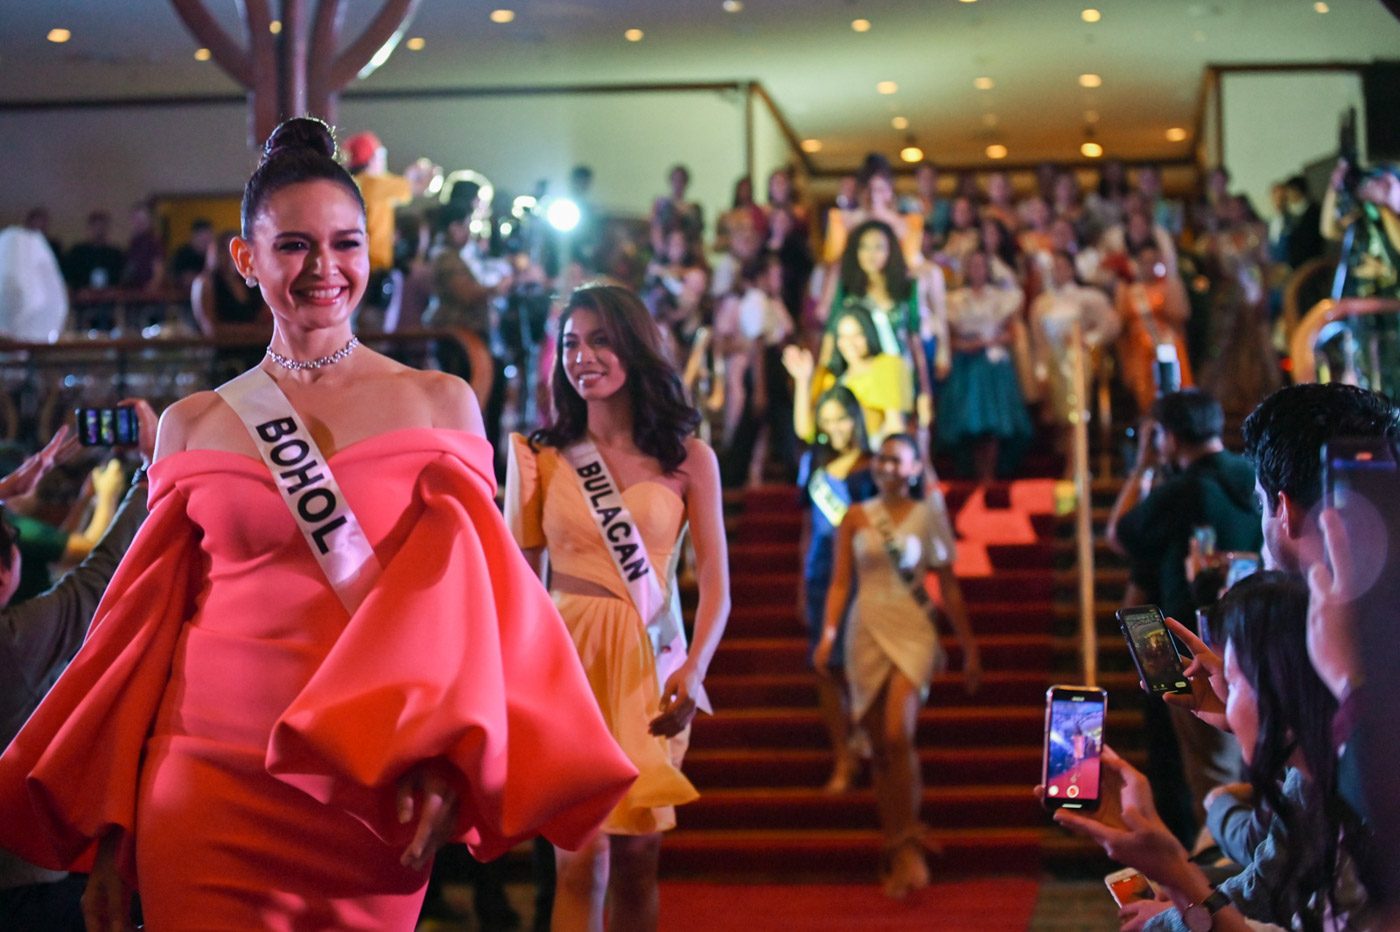 Harry Roque, Eric Yap among Miss Universe Philippines 2020 judges